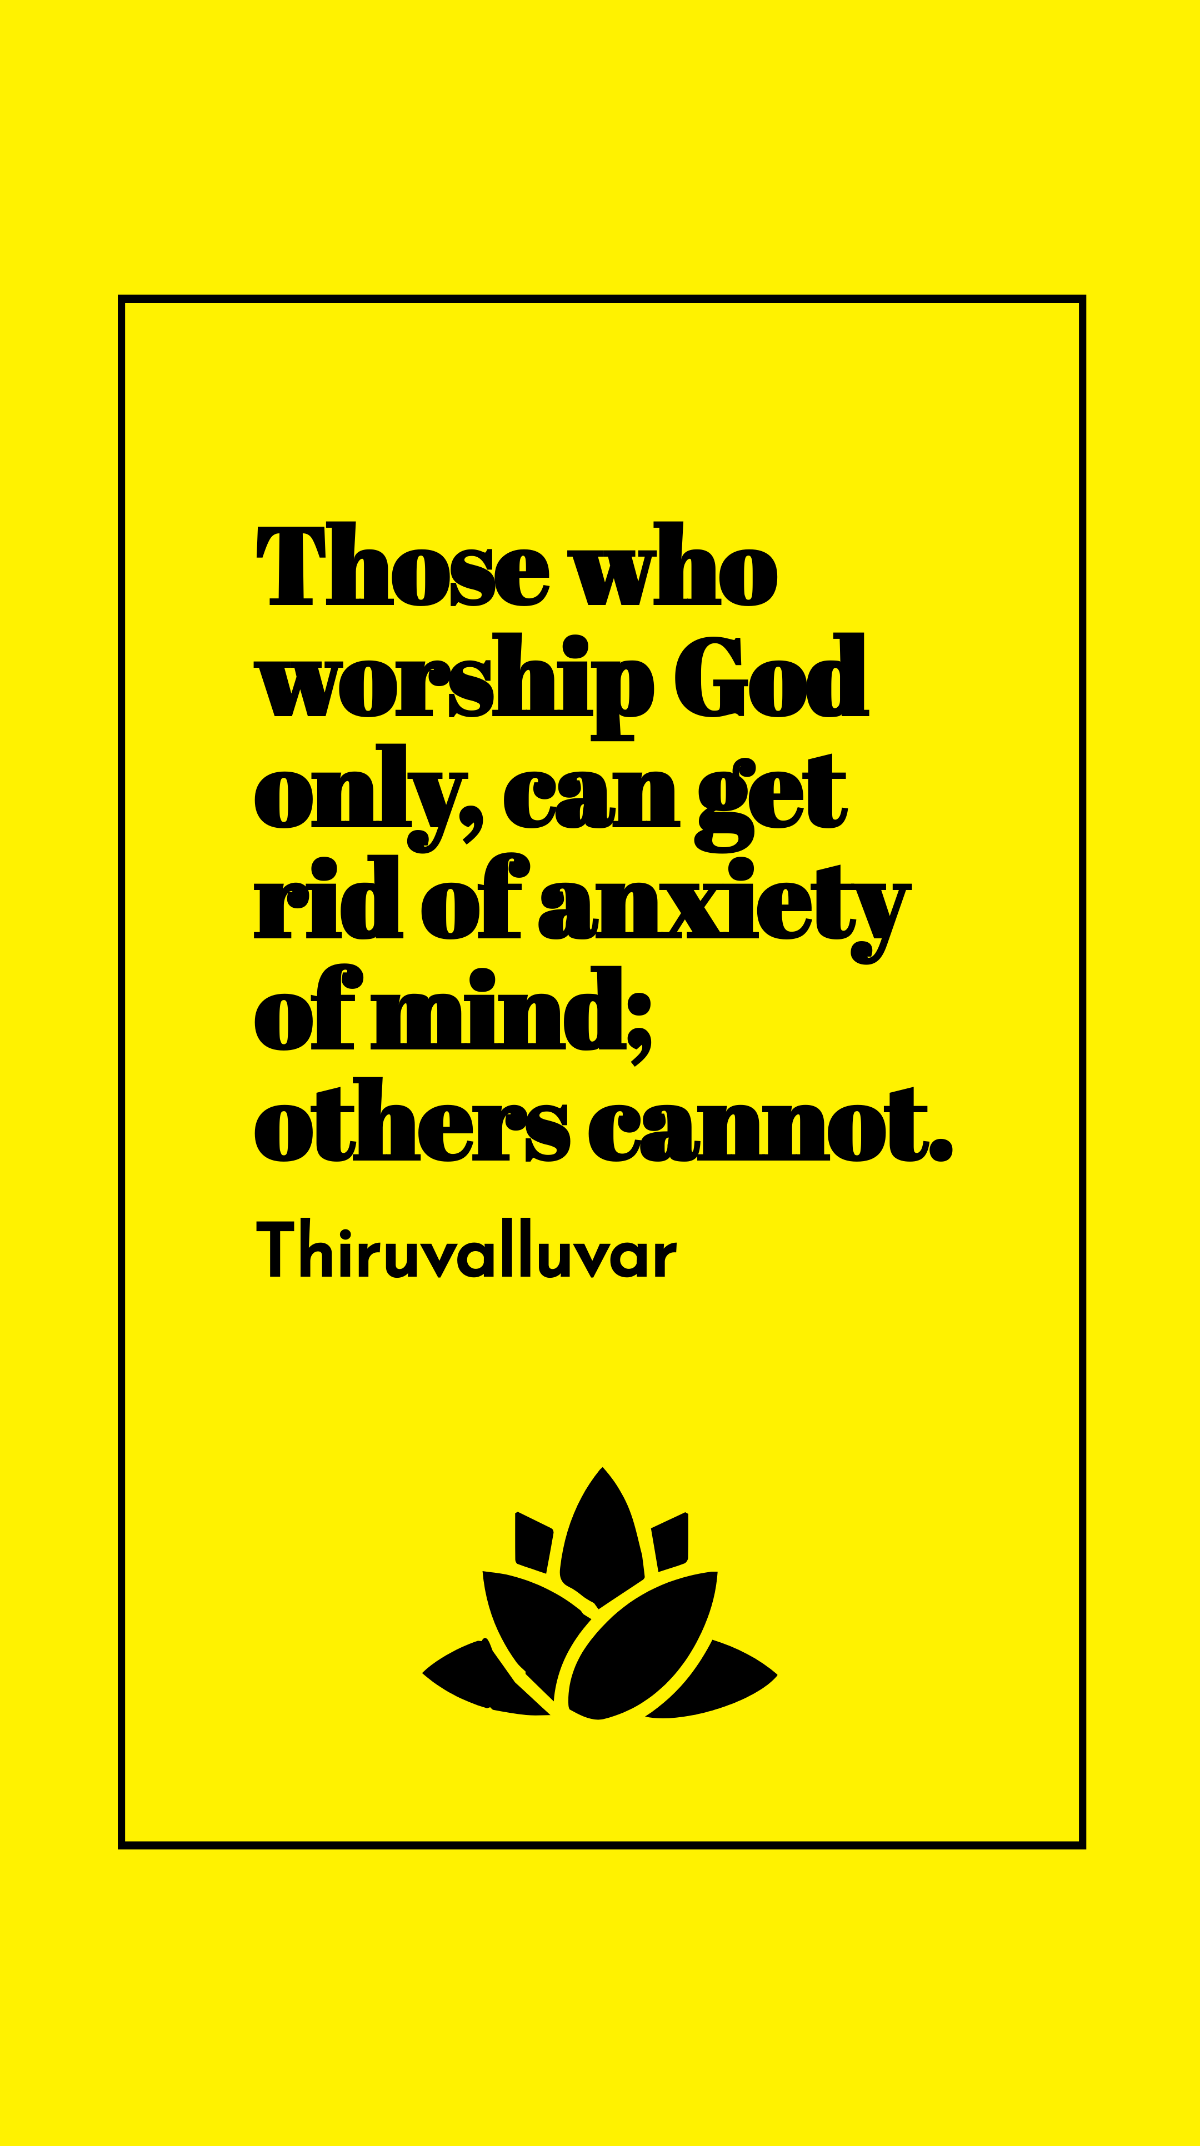 Thiruvalluvar - Those who worship God only, can get rid of anxiety of mind; others cannot. Template